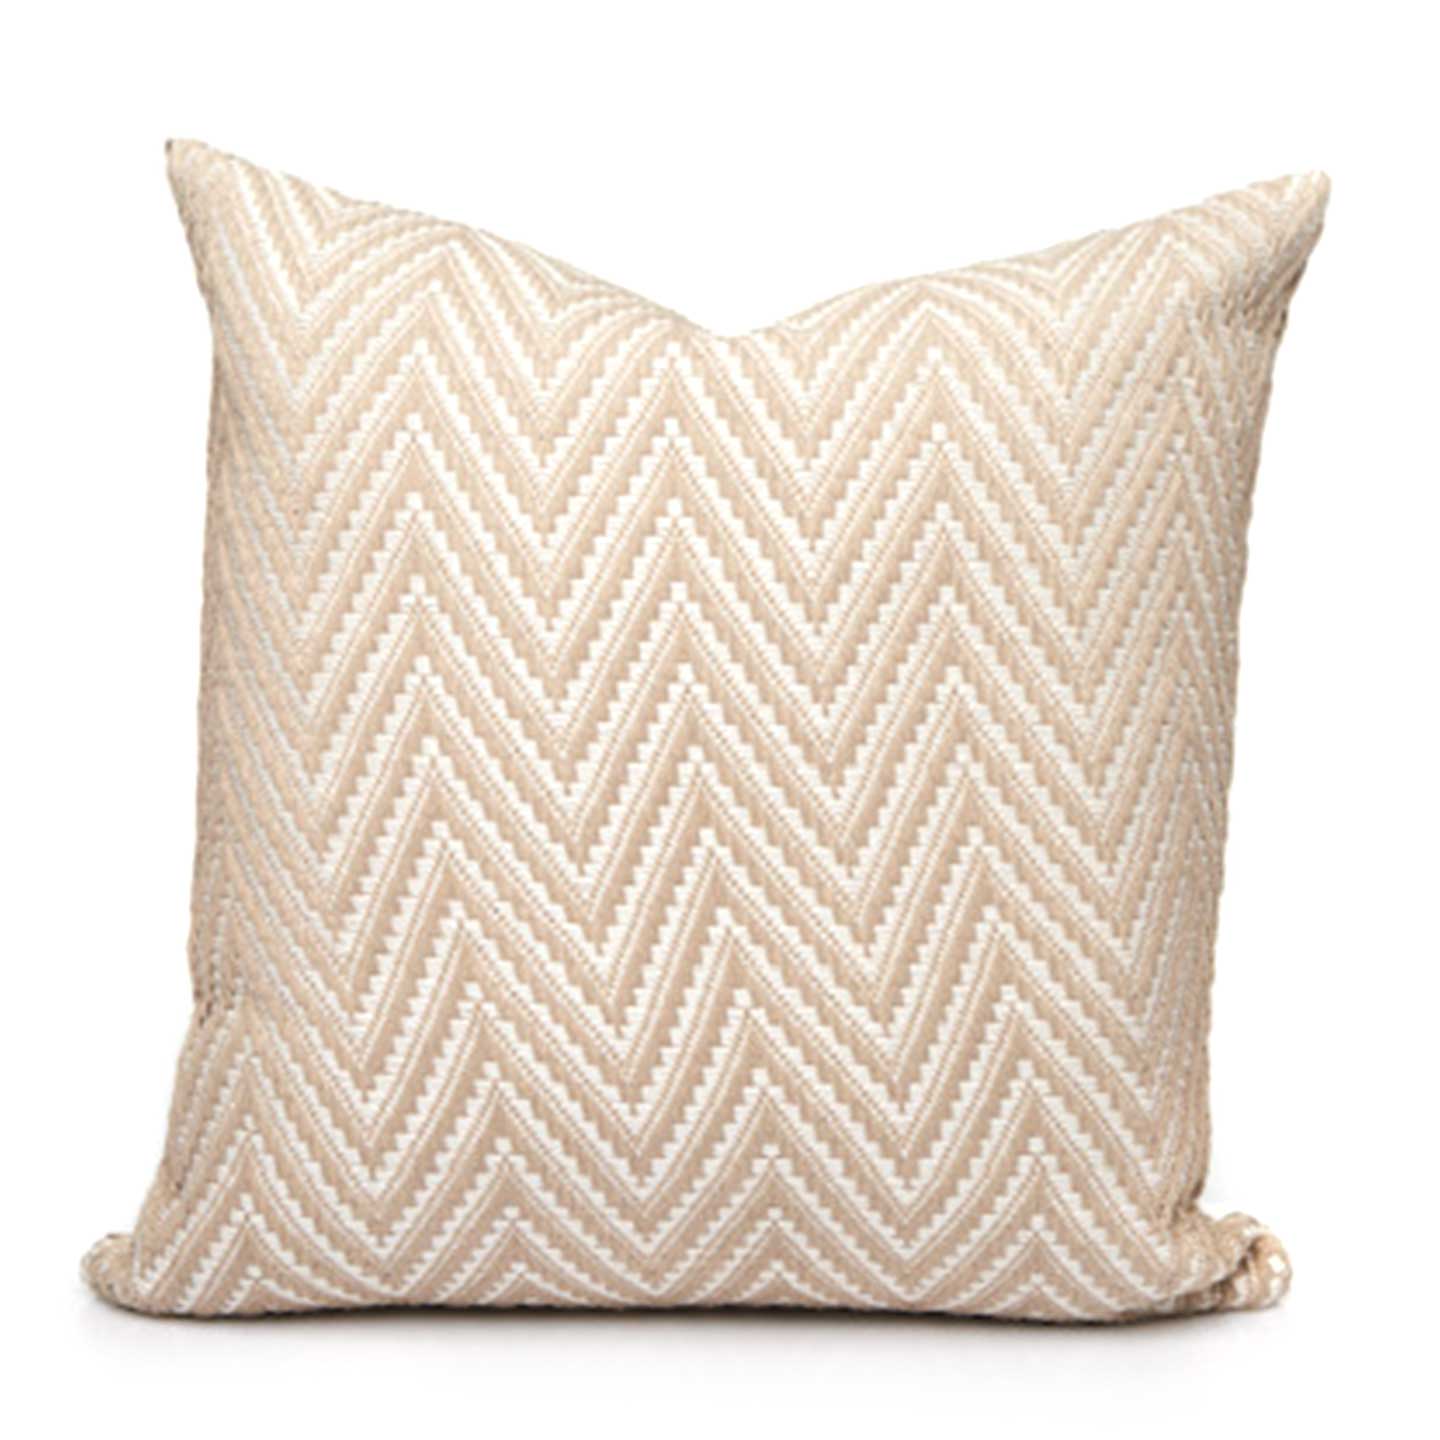 The Maggie pillow by Beau Home